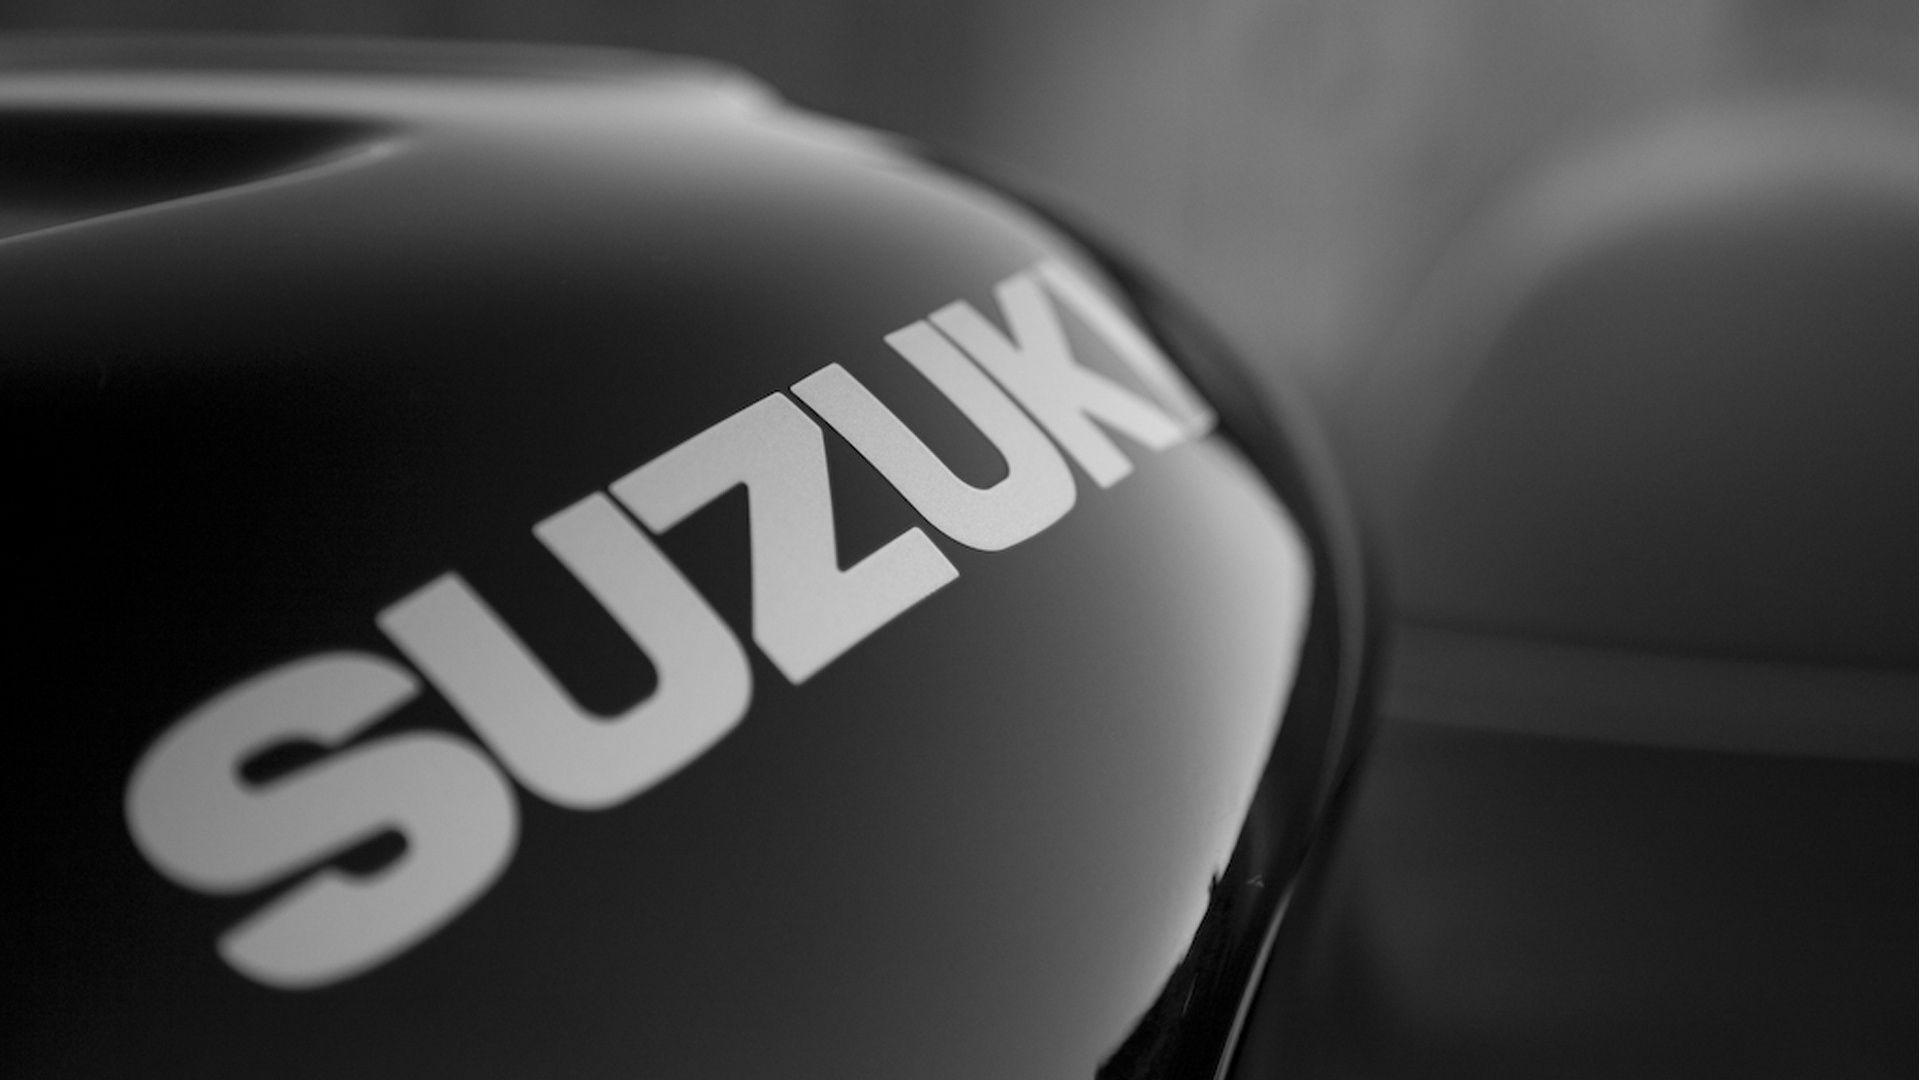 Suzuki Motorcycle Logo - millionth unit rolled out by Suzuki Motorcycle in the Indian Market